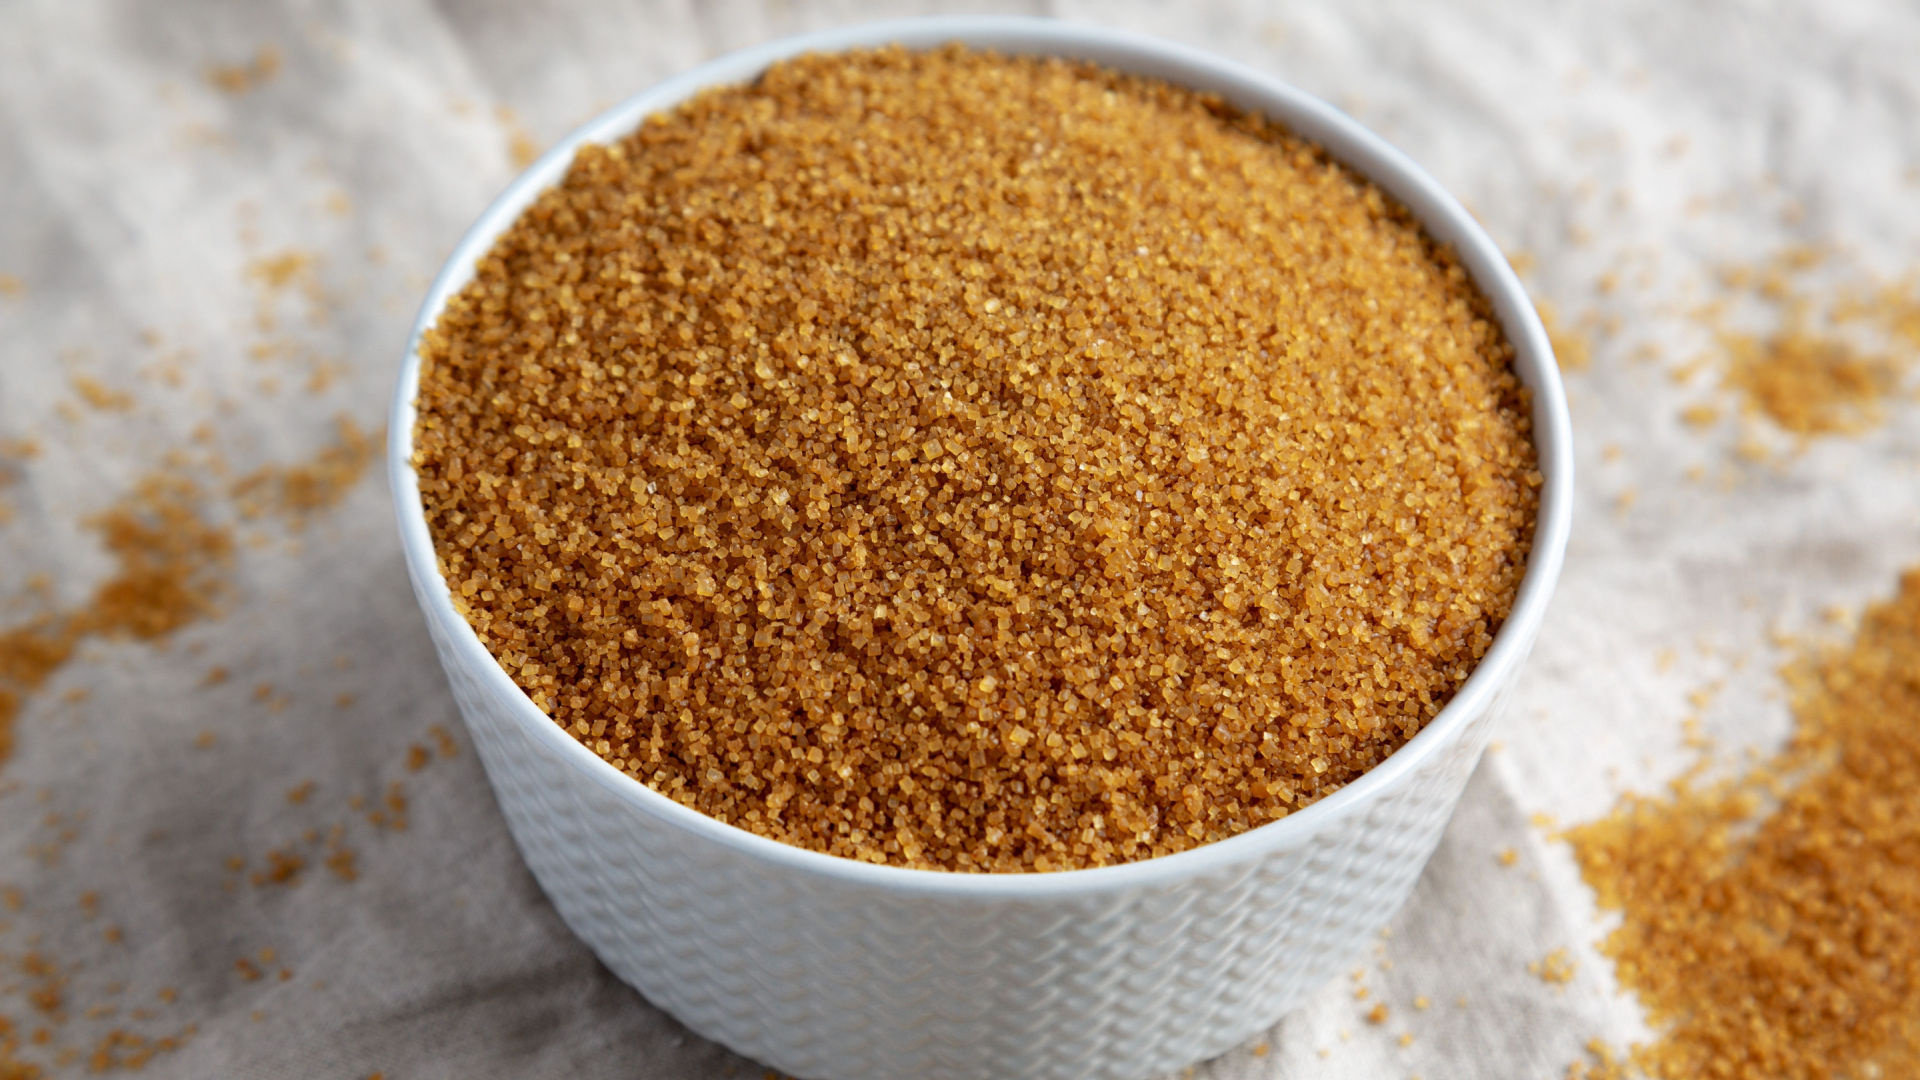 Healthy Options - Muscovado sugar is unrefined cane sugar that contains  natural molasses. It has a rich brown color, moist texture and toffee-like  flavor you'll notice at first taste. Due to its